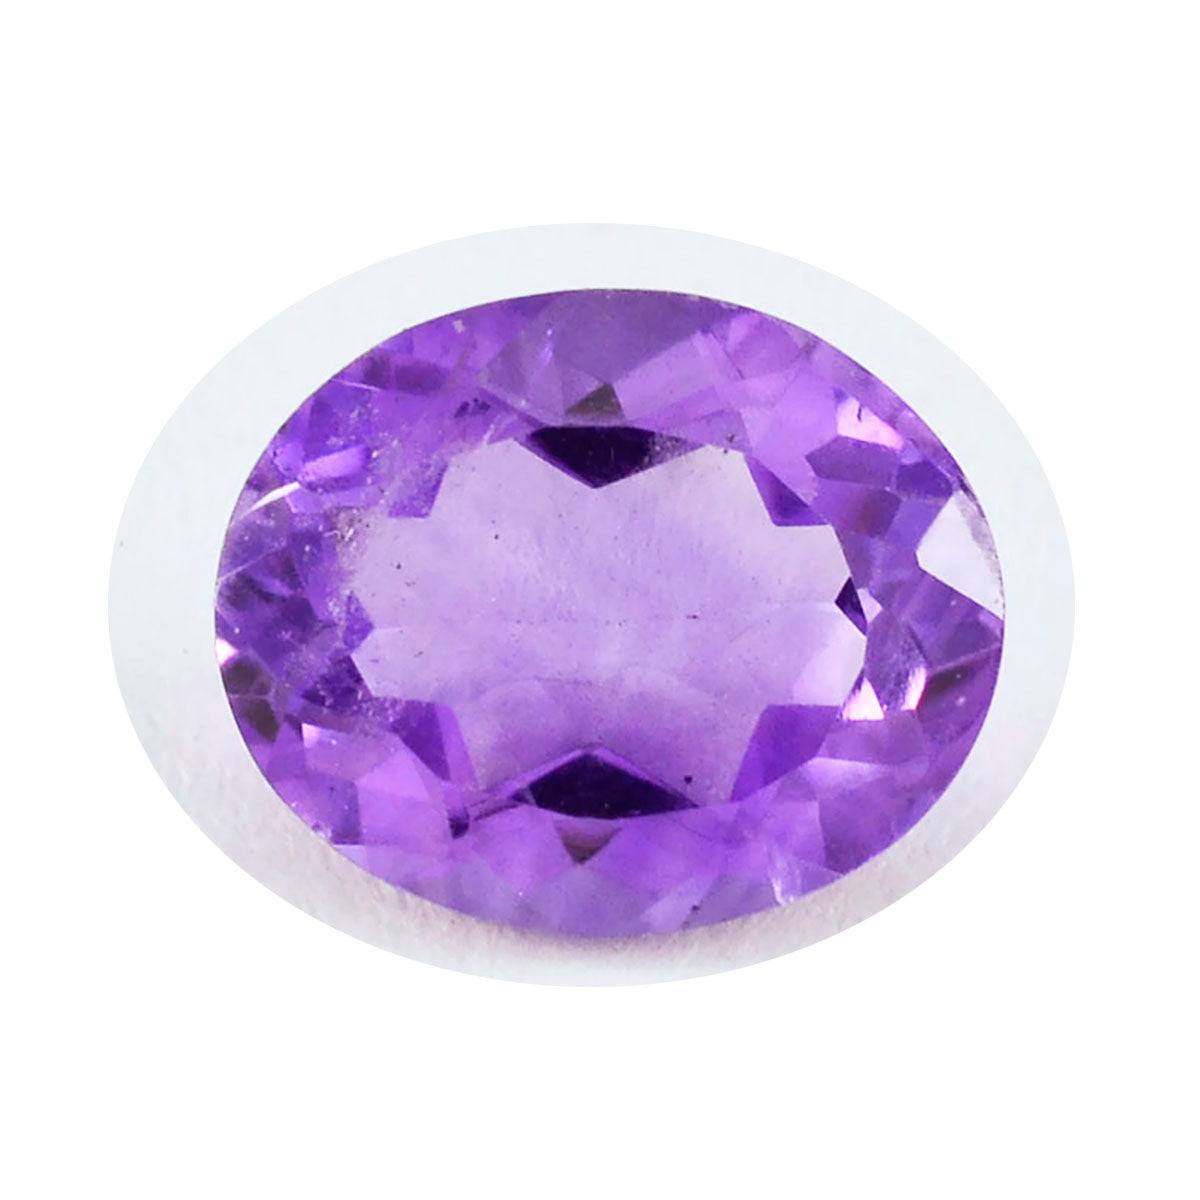 Riyogems 1PC Natural Purple Amethyst Faceted 12x16 mm Oval Shape pretty Quality Loose Stone